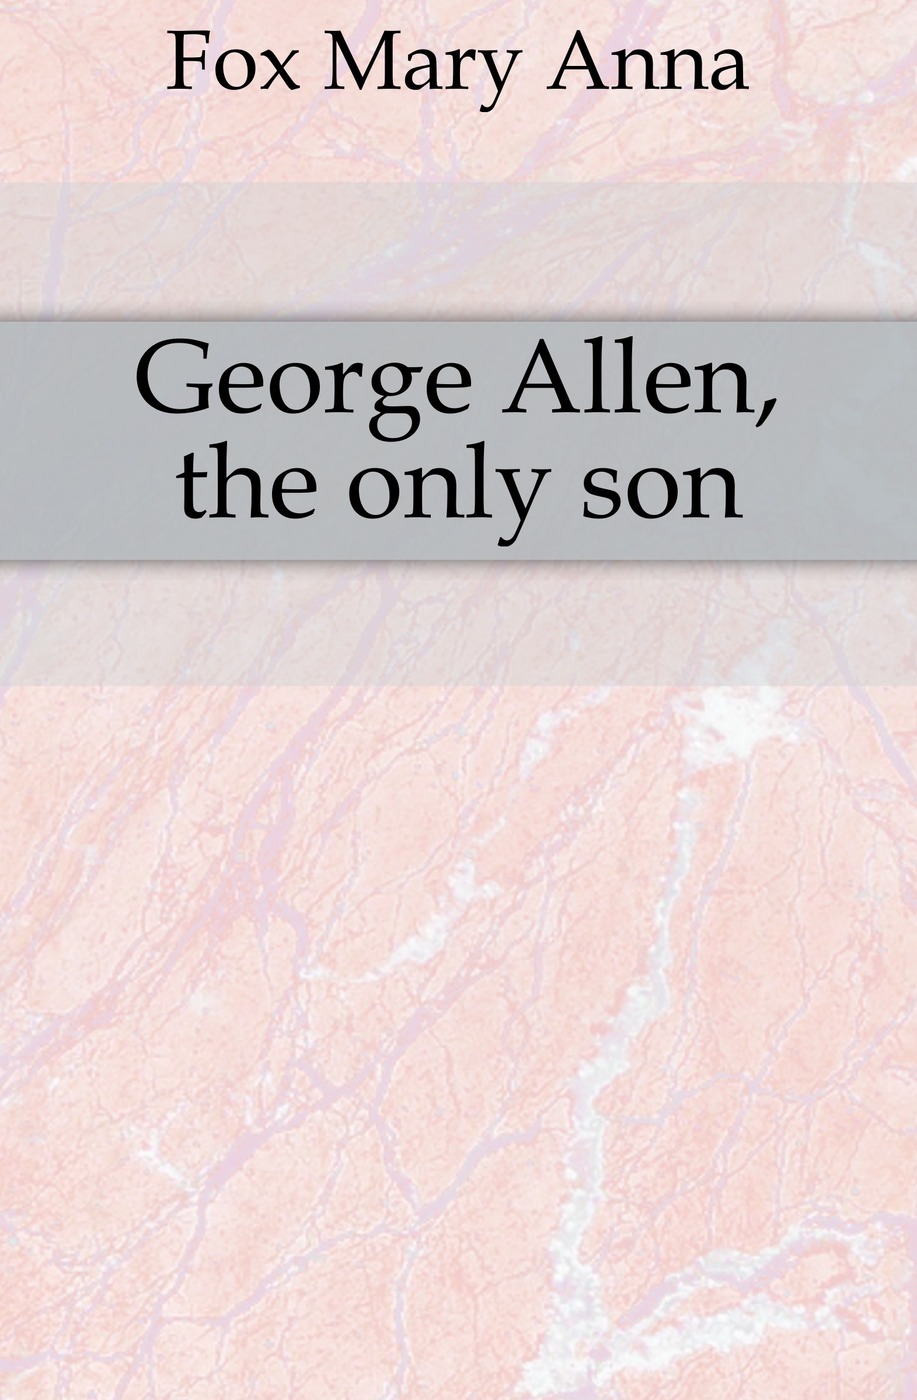 George Allen, the only son